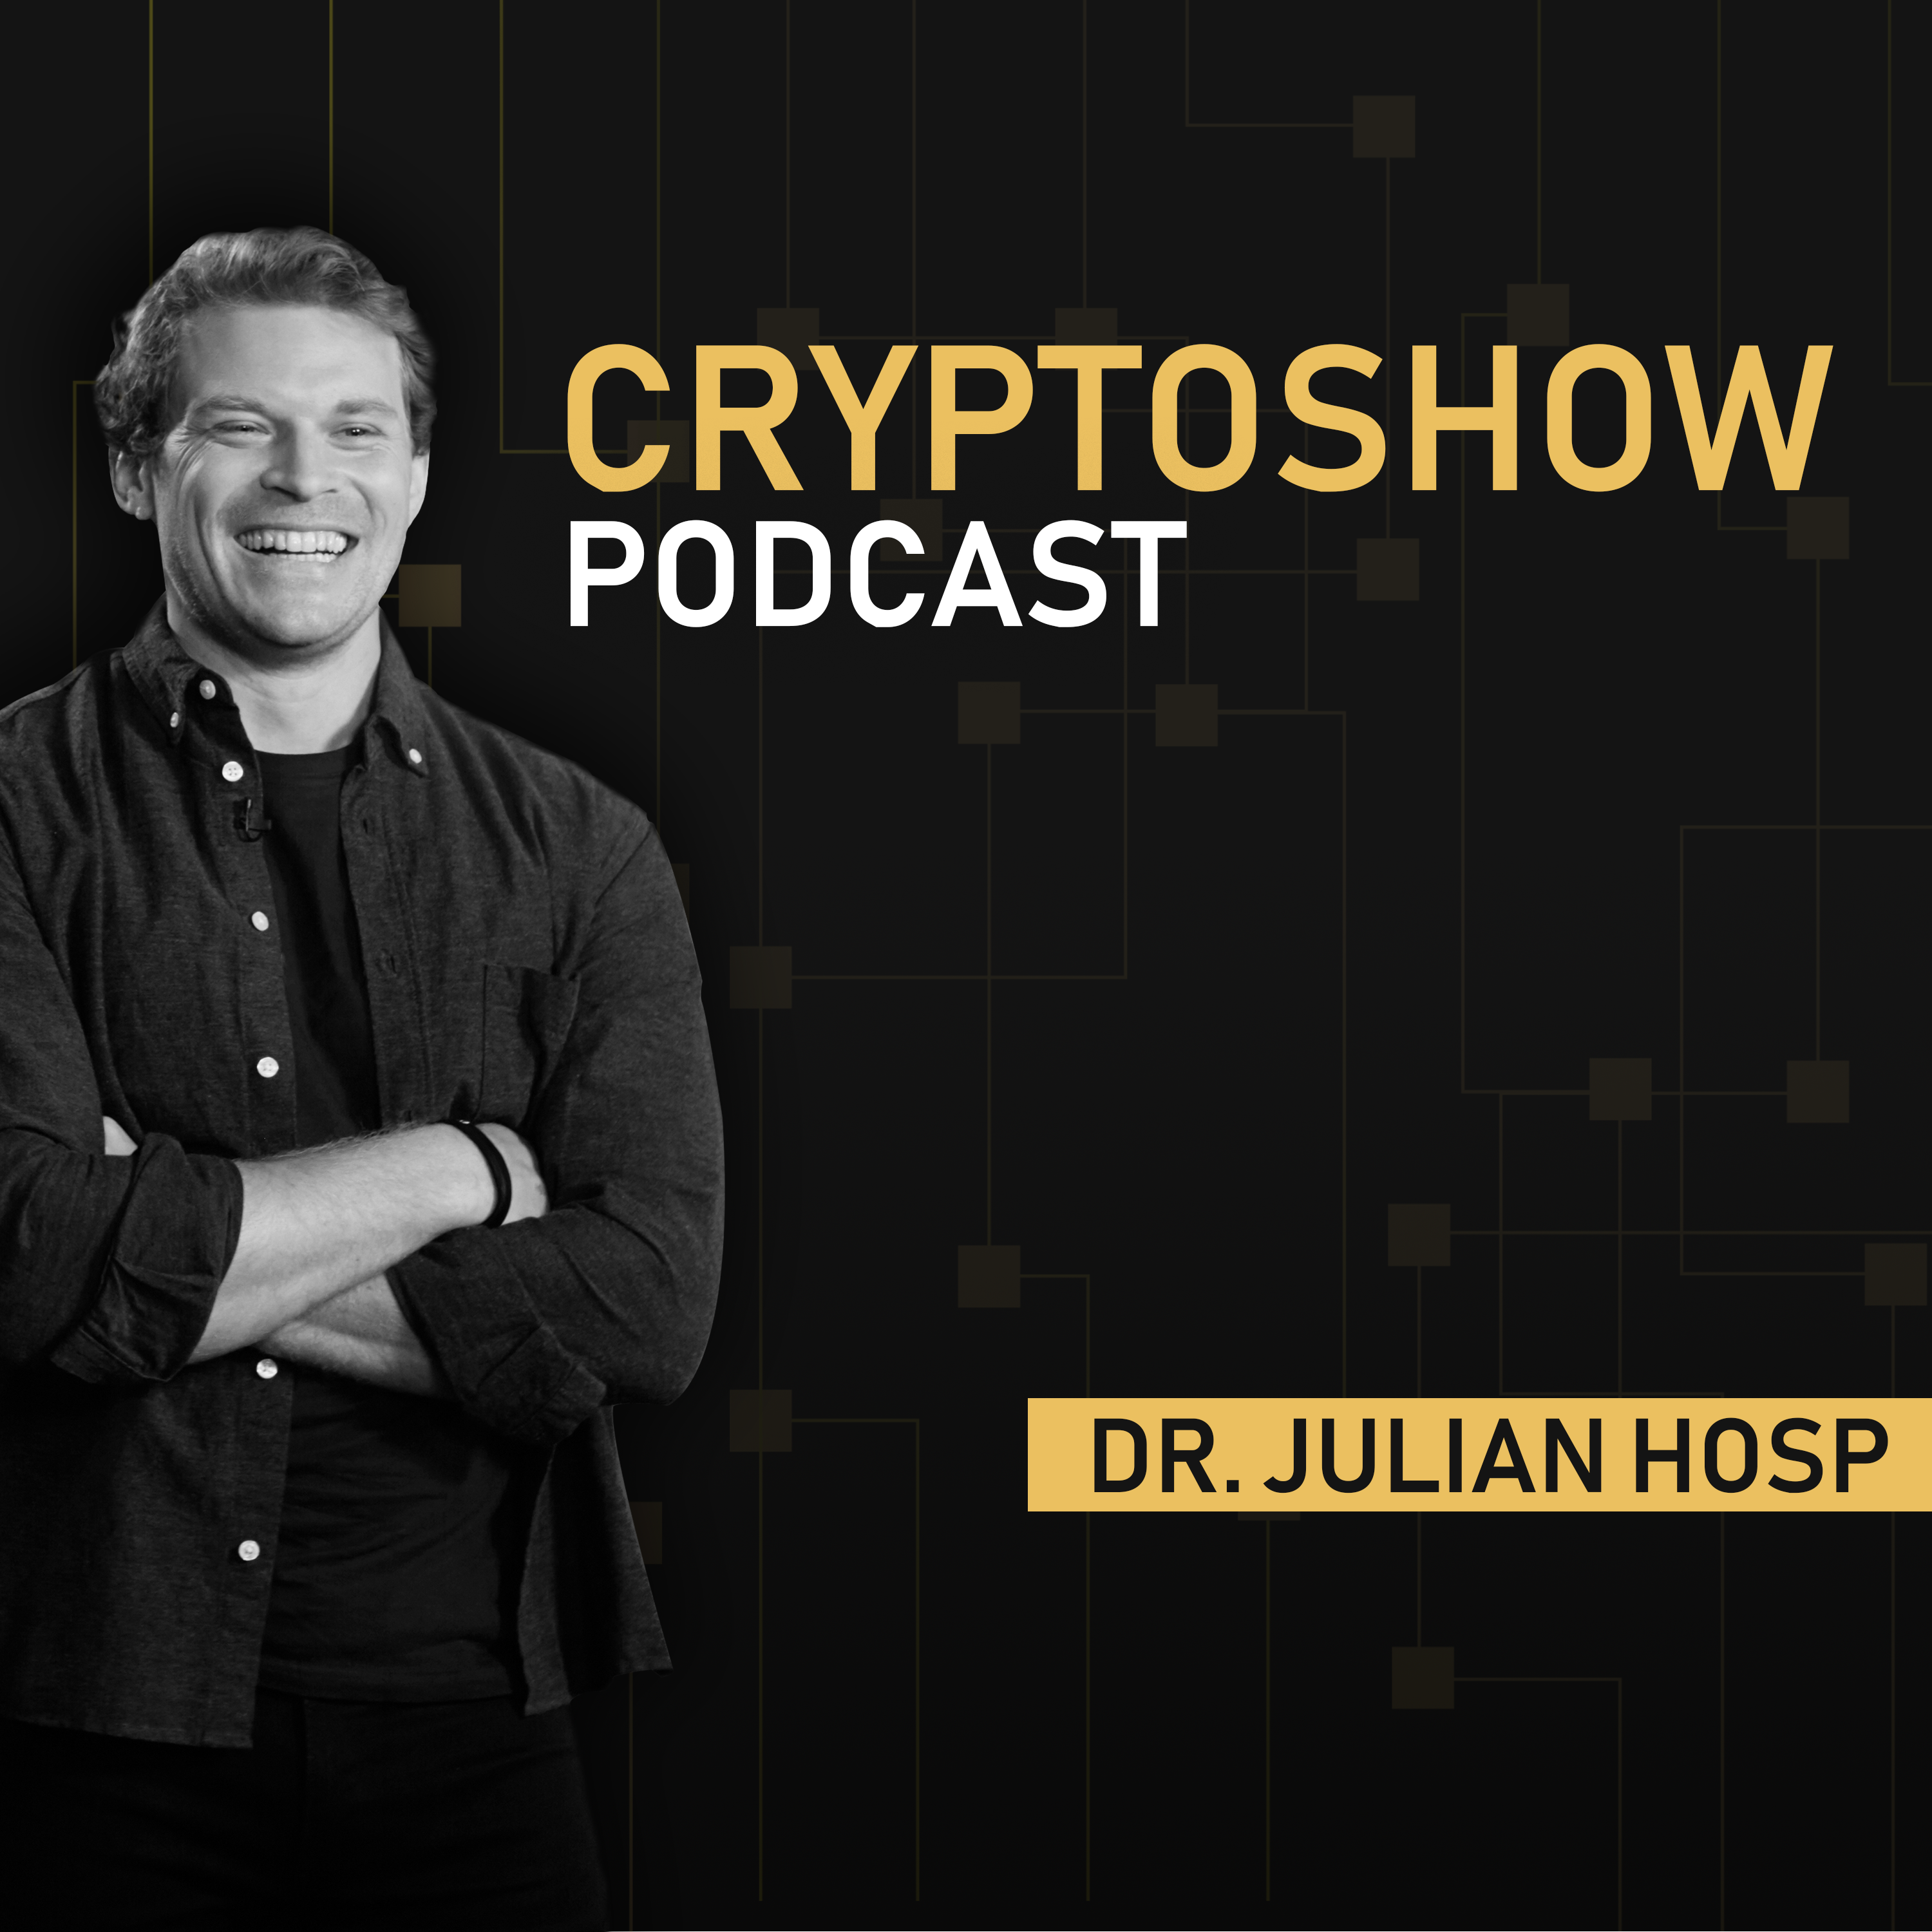 Fresh update on "warren buffett" discussed on The Cryptoshow - blockchain, cryptocurrencies, Bitcoin and decentralization simply explained